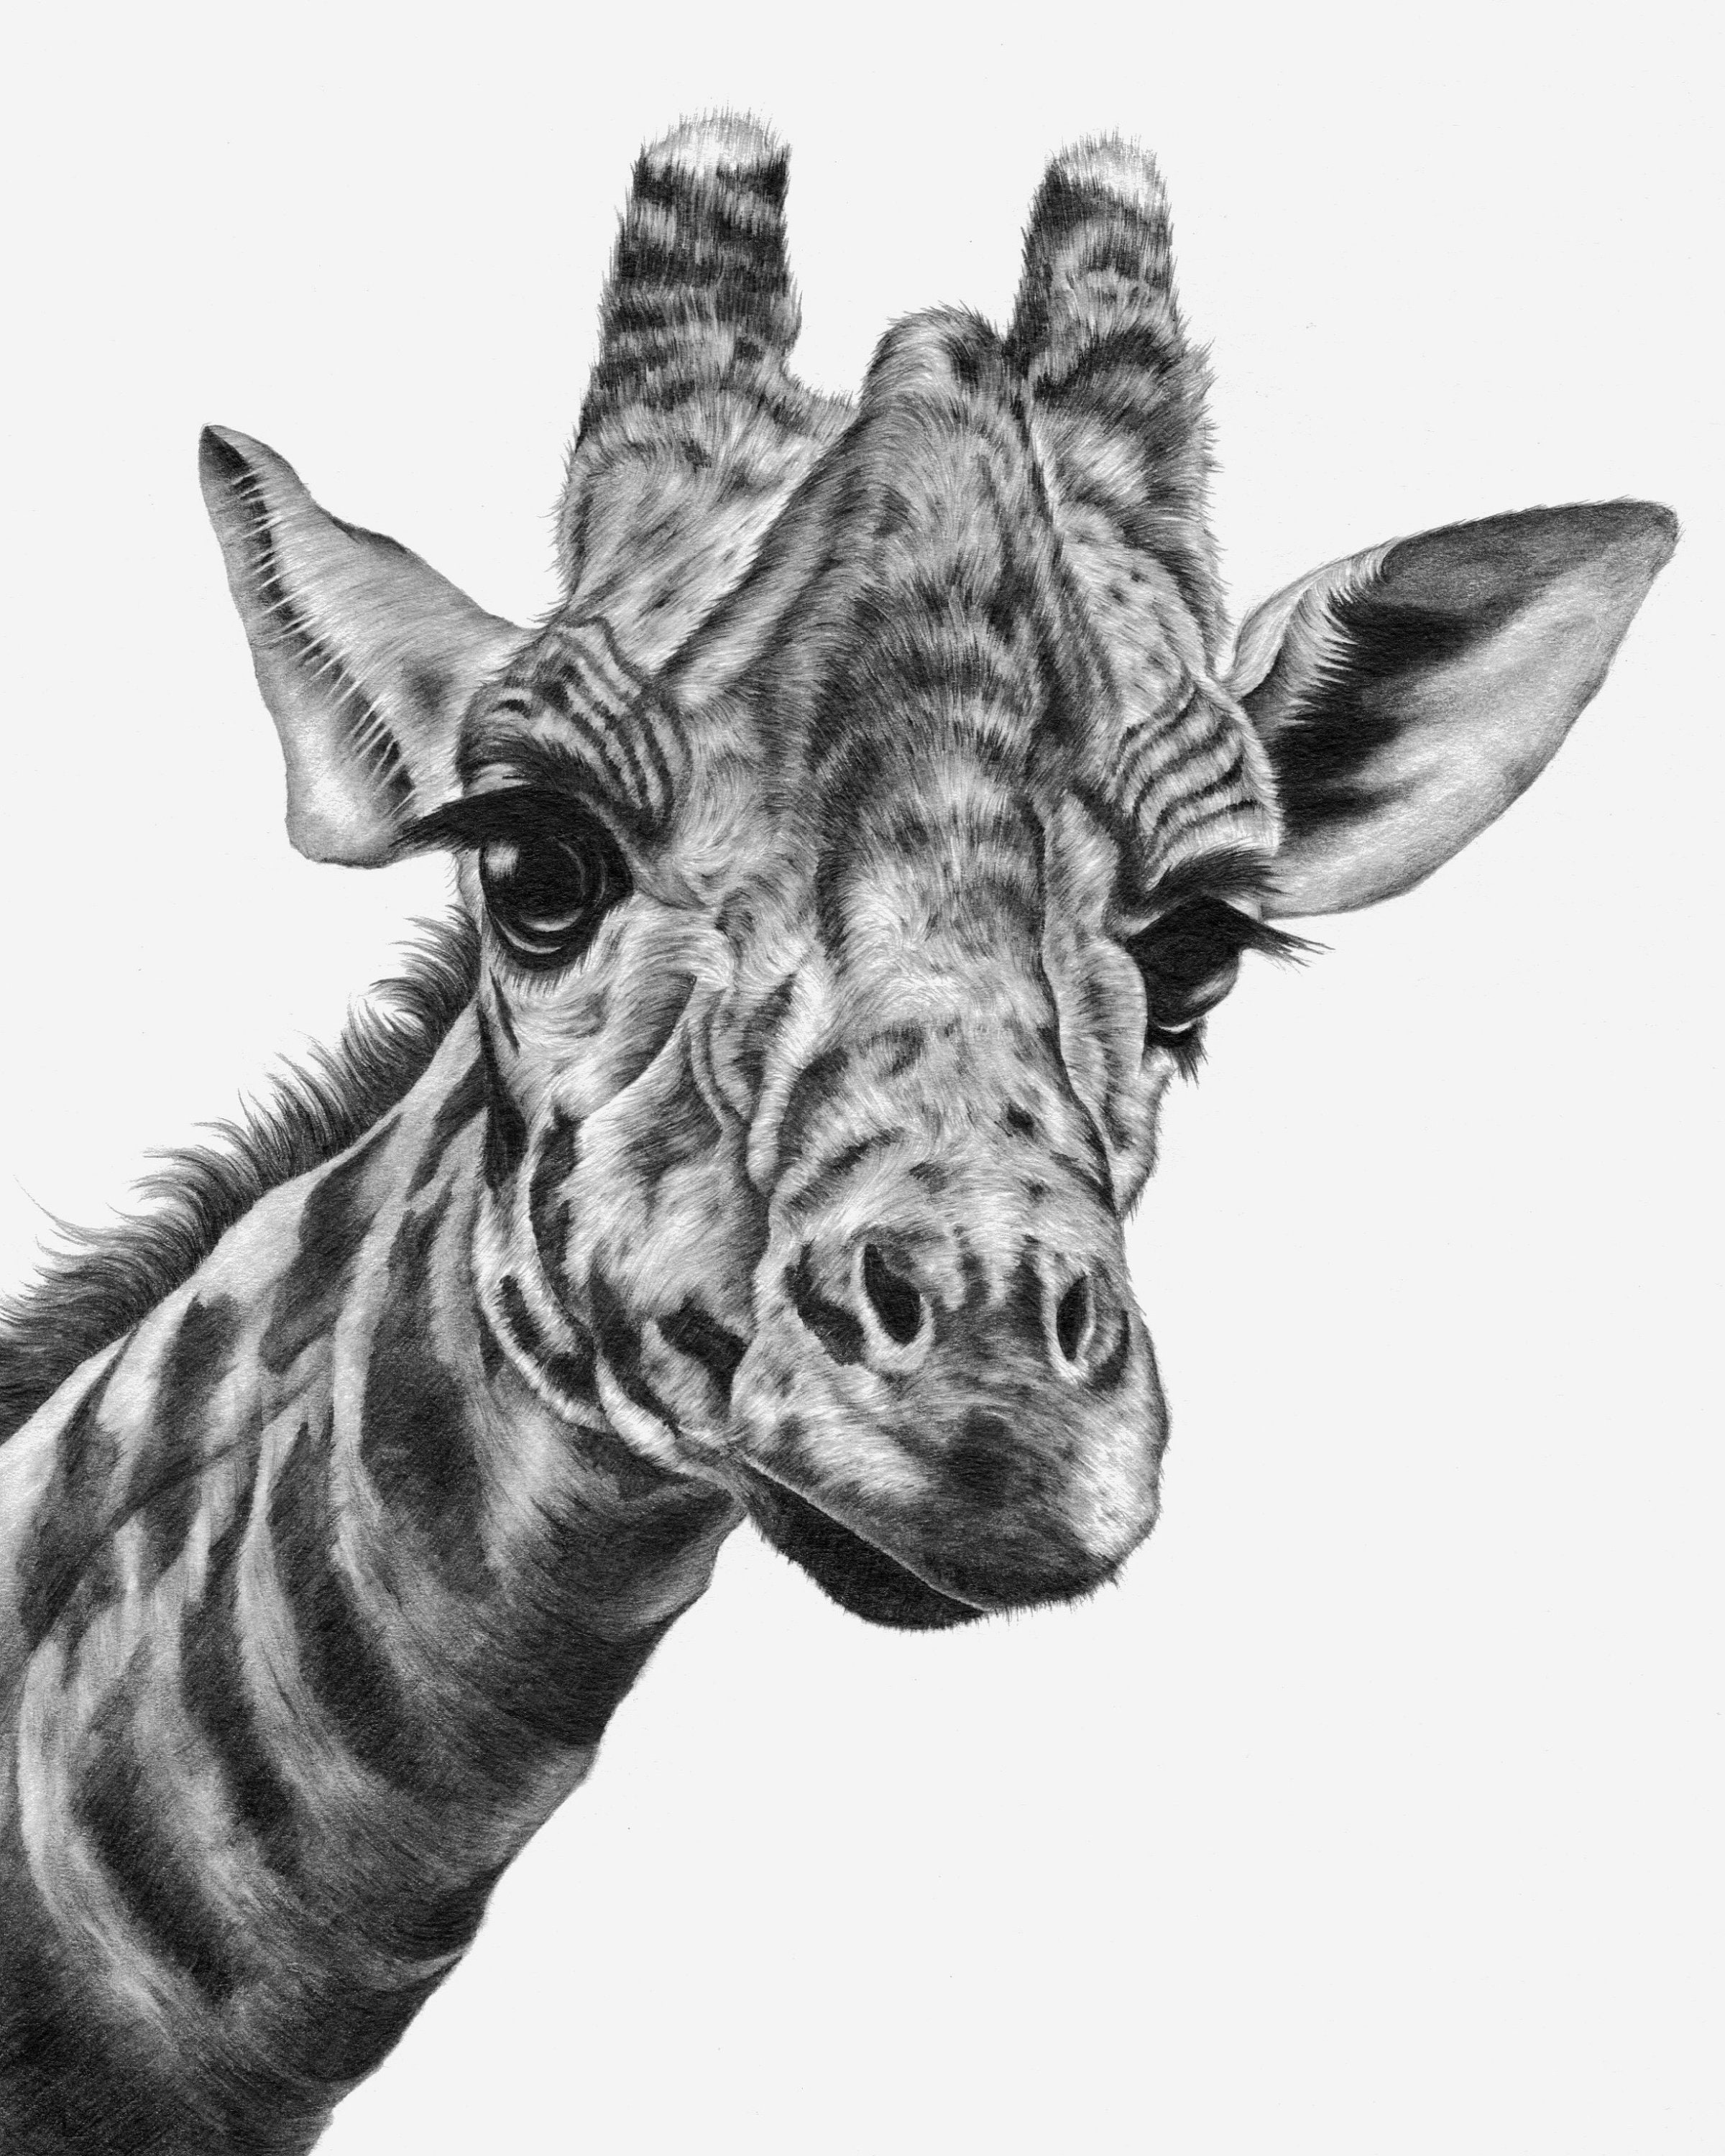 Giraffe Sketch Stock Photos and Images - 123RF-anthinhphatland.vn